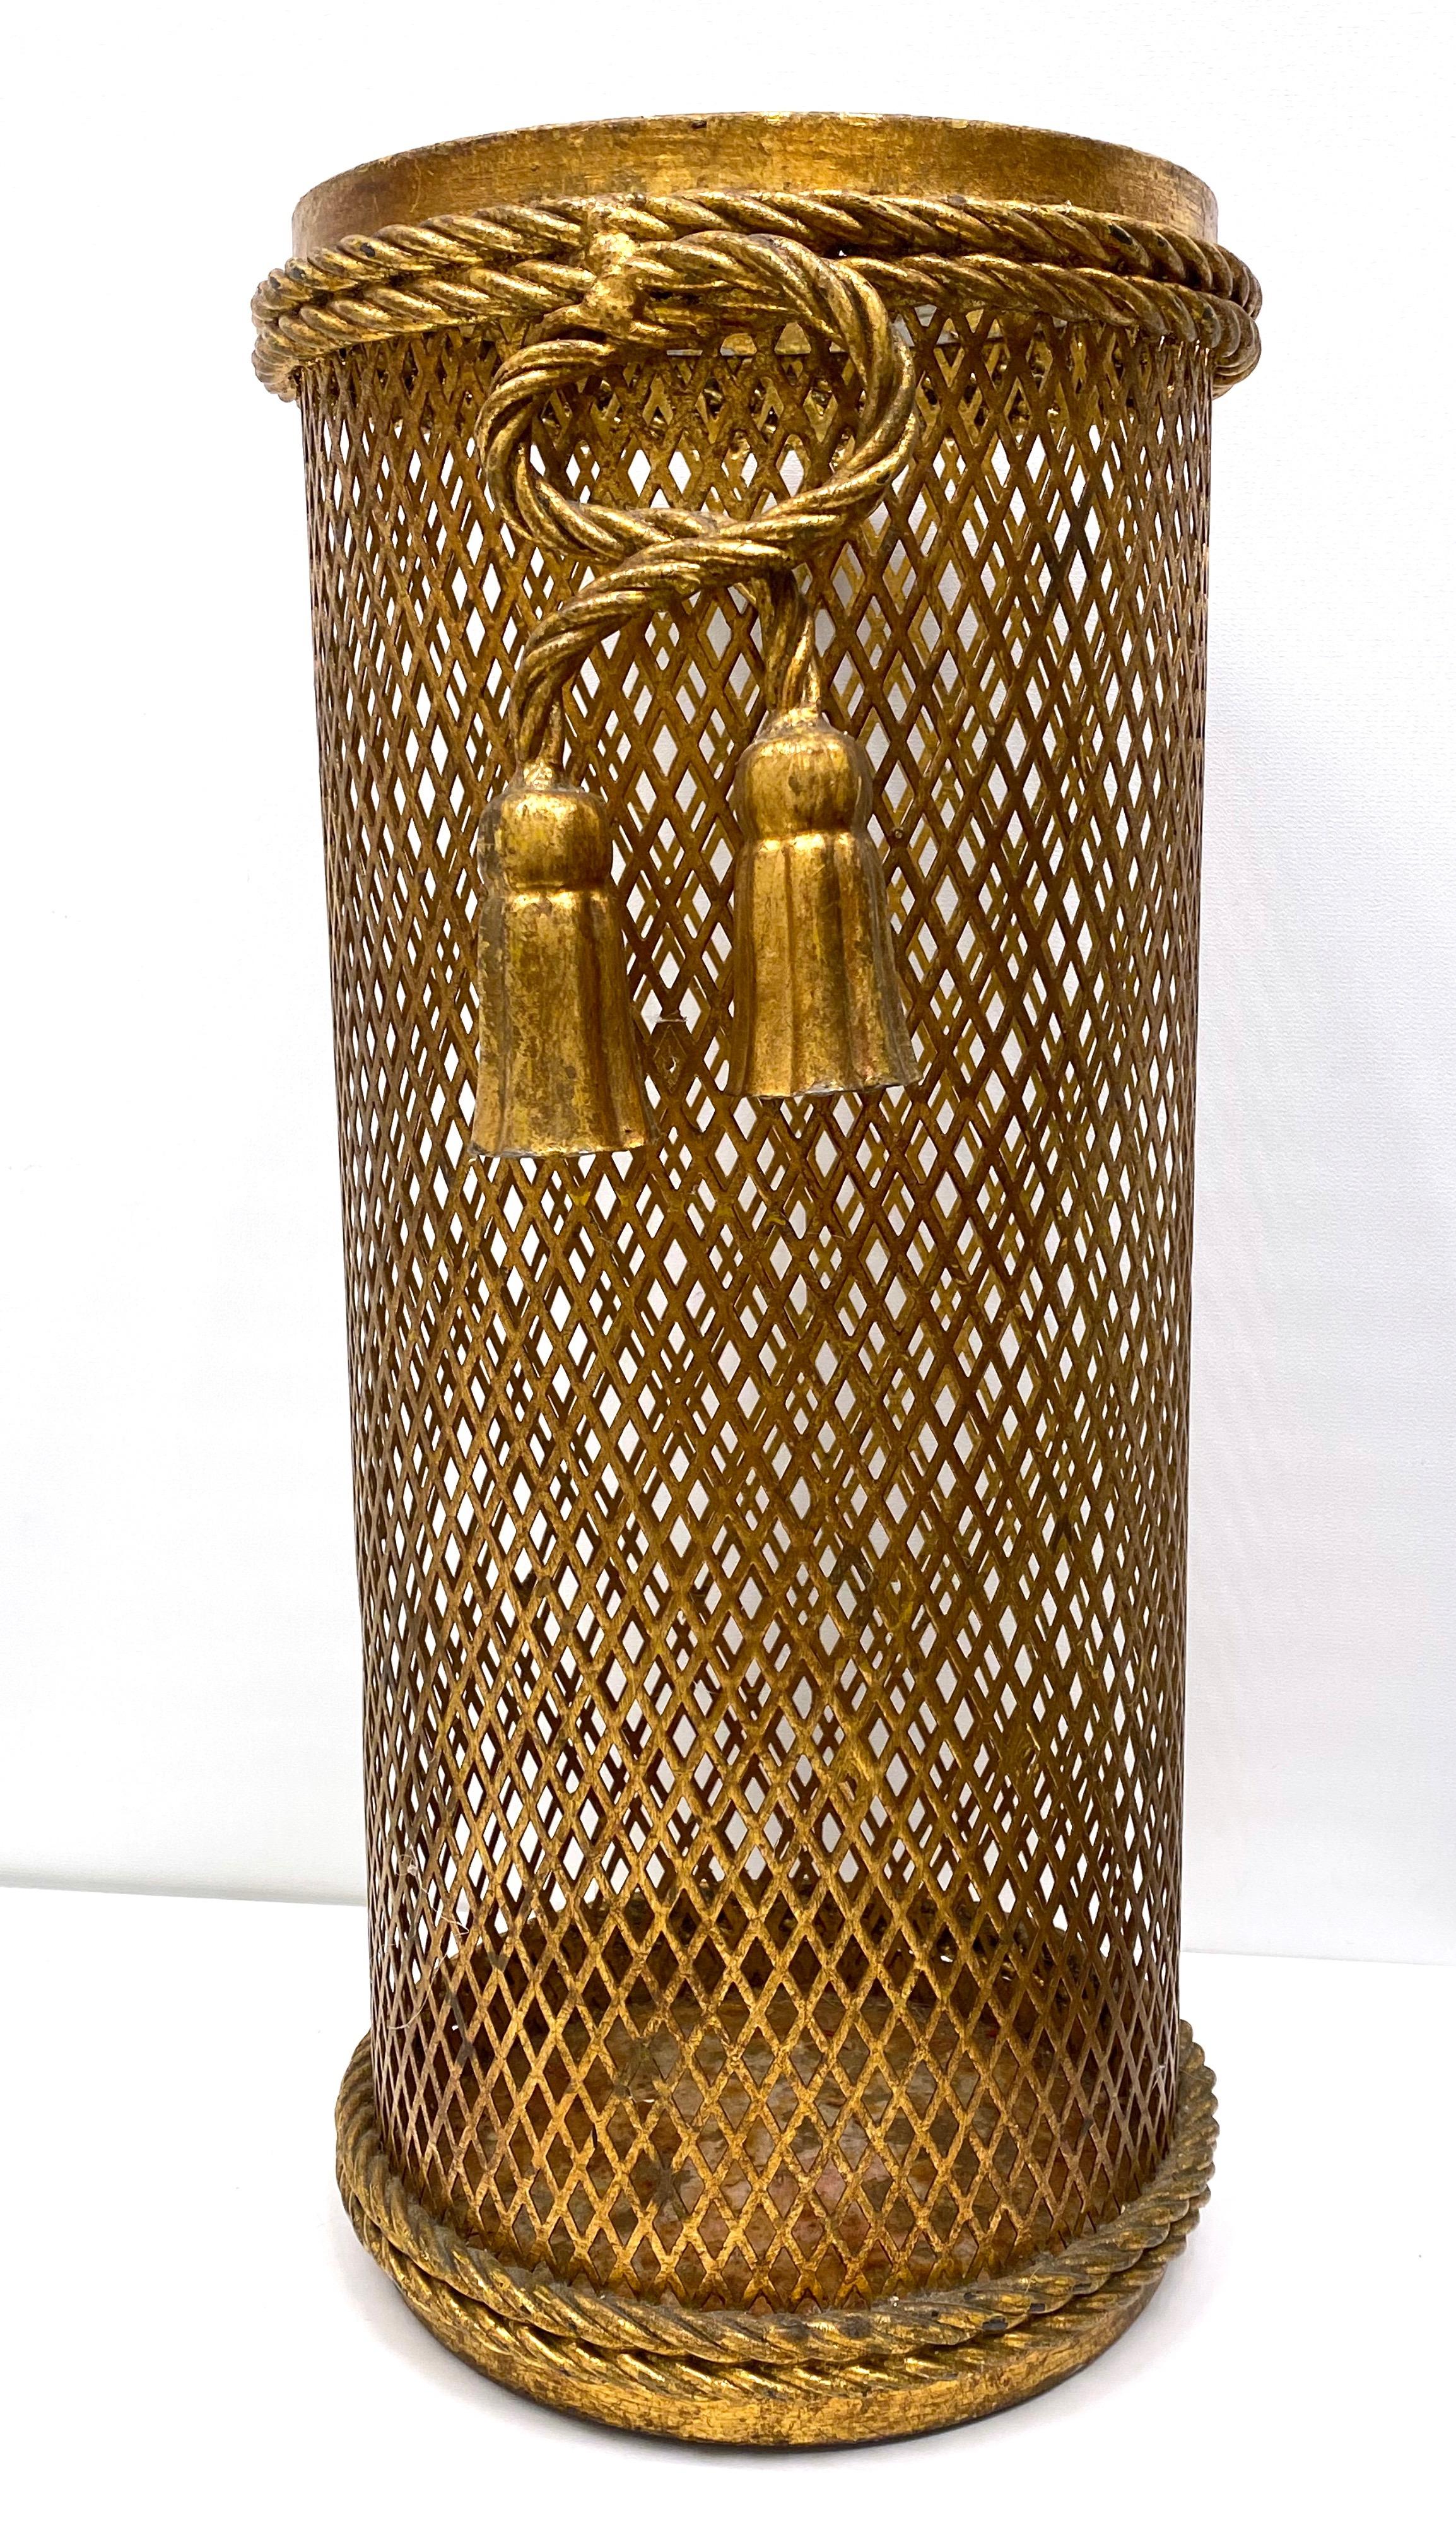 A gorgeous Hollywood Regency umbrella stand. Made of gilded metal. Some minor dents and paint lost appear but this is old-age. Made in Florence, Italy, circa 1950 by Li Puma Firenze. The perforated lattice patterned metalwork with bent rope and